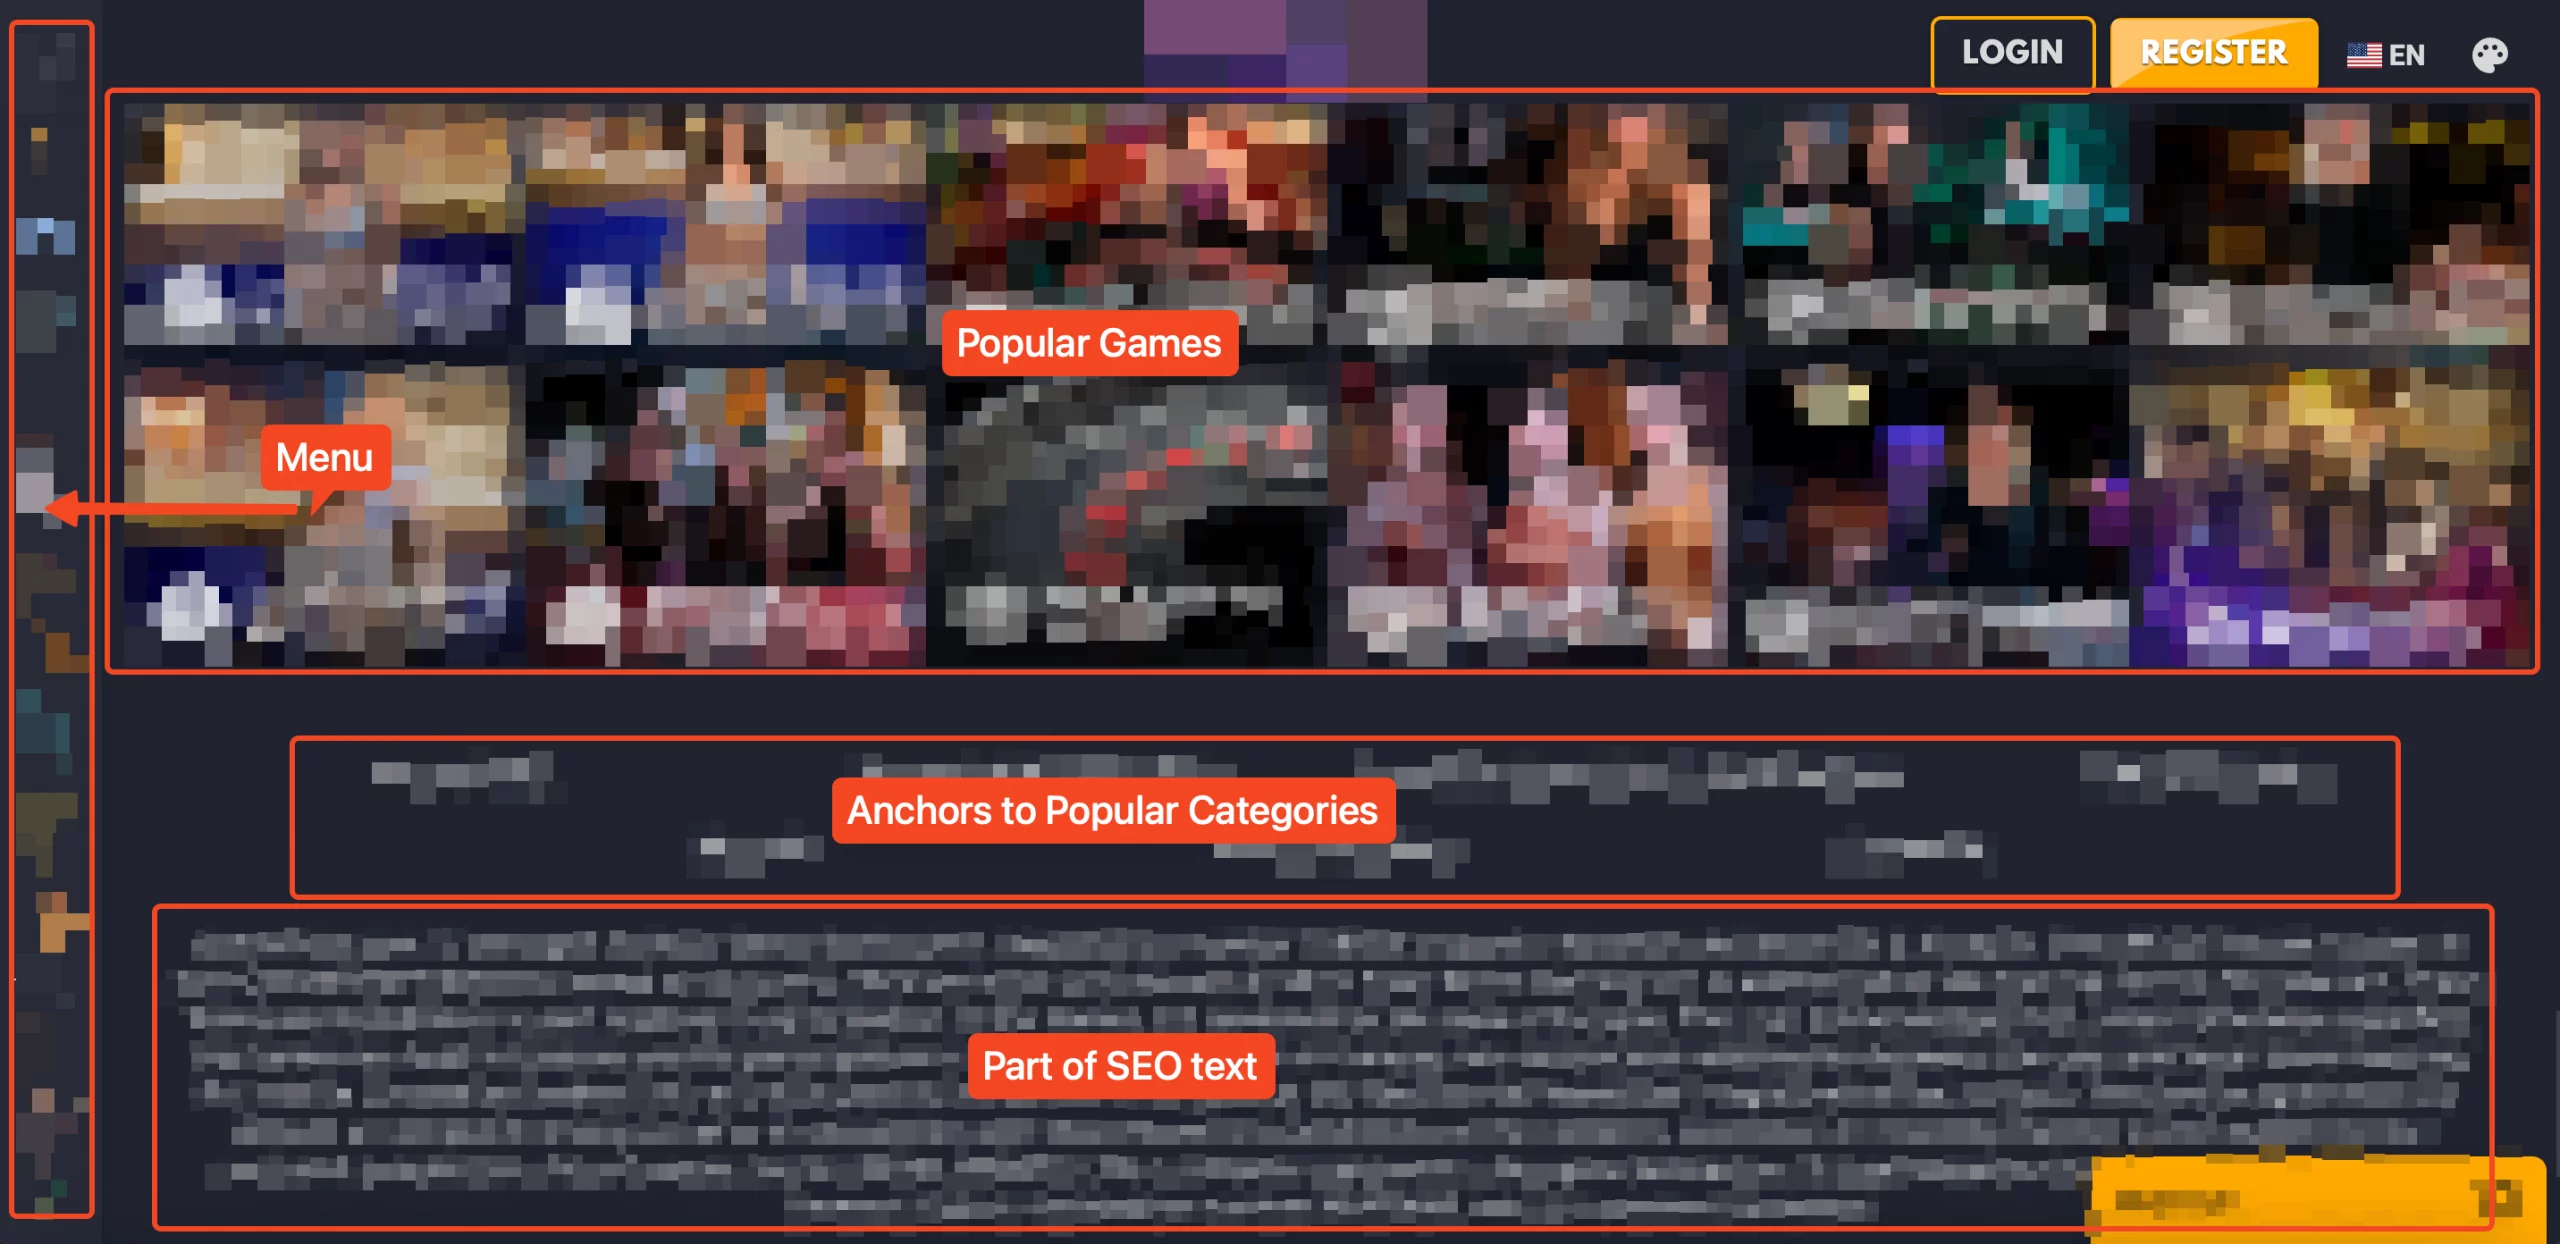 A blurred screenshot of a page with a schematic description of the content on the page.